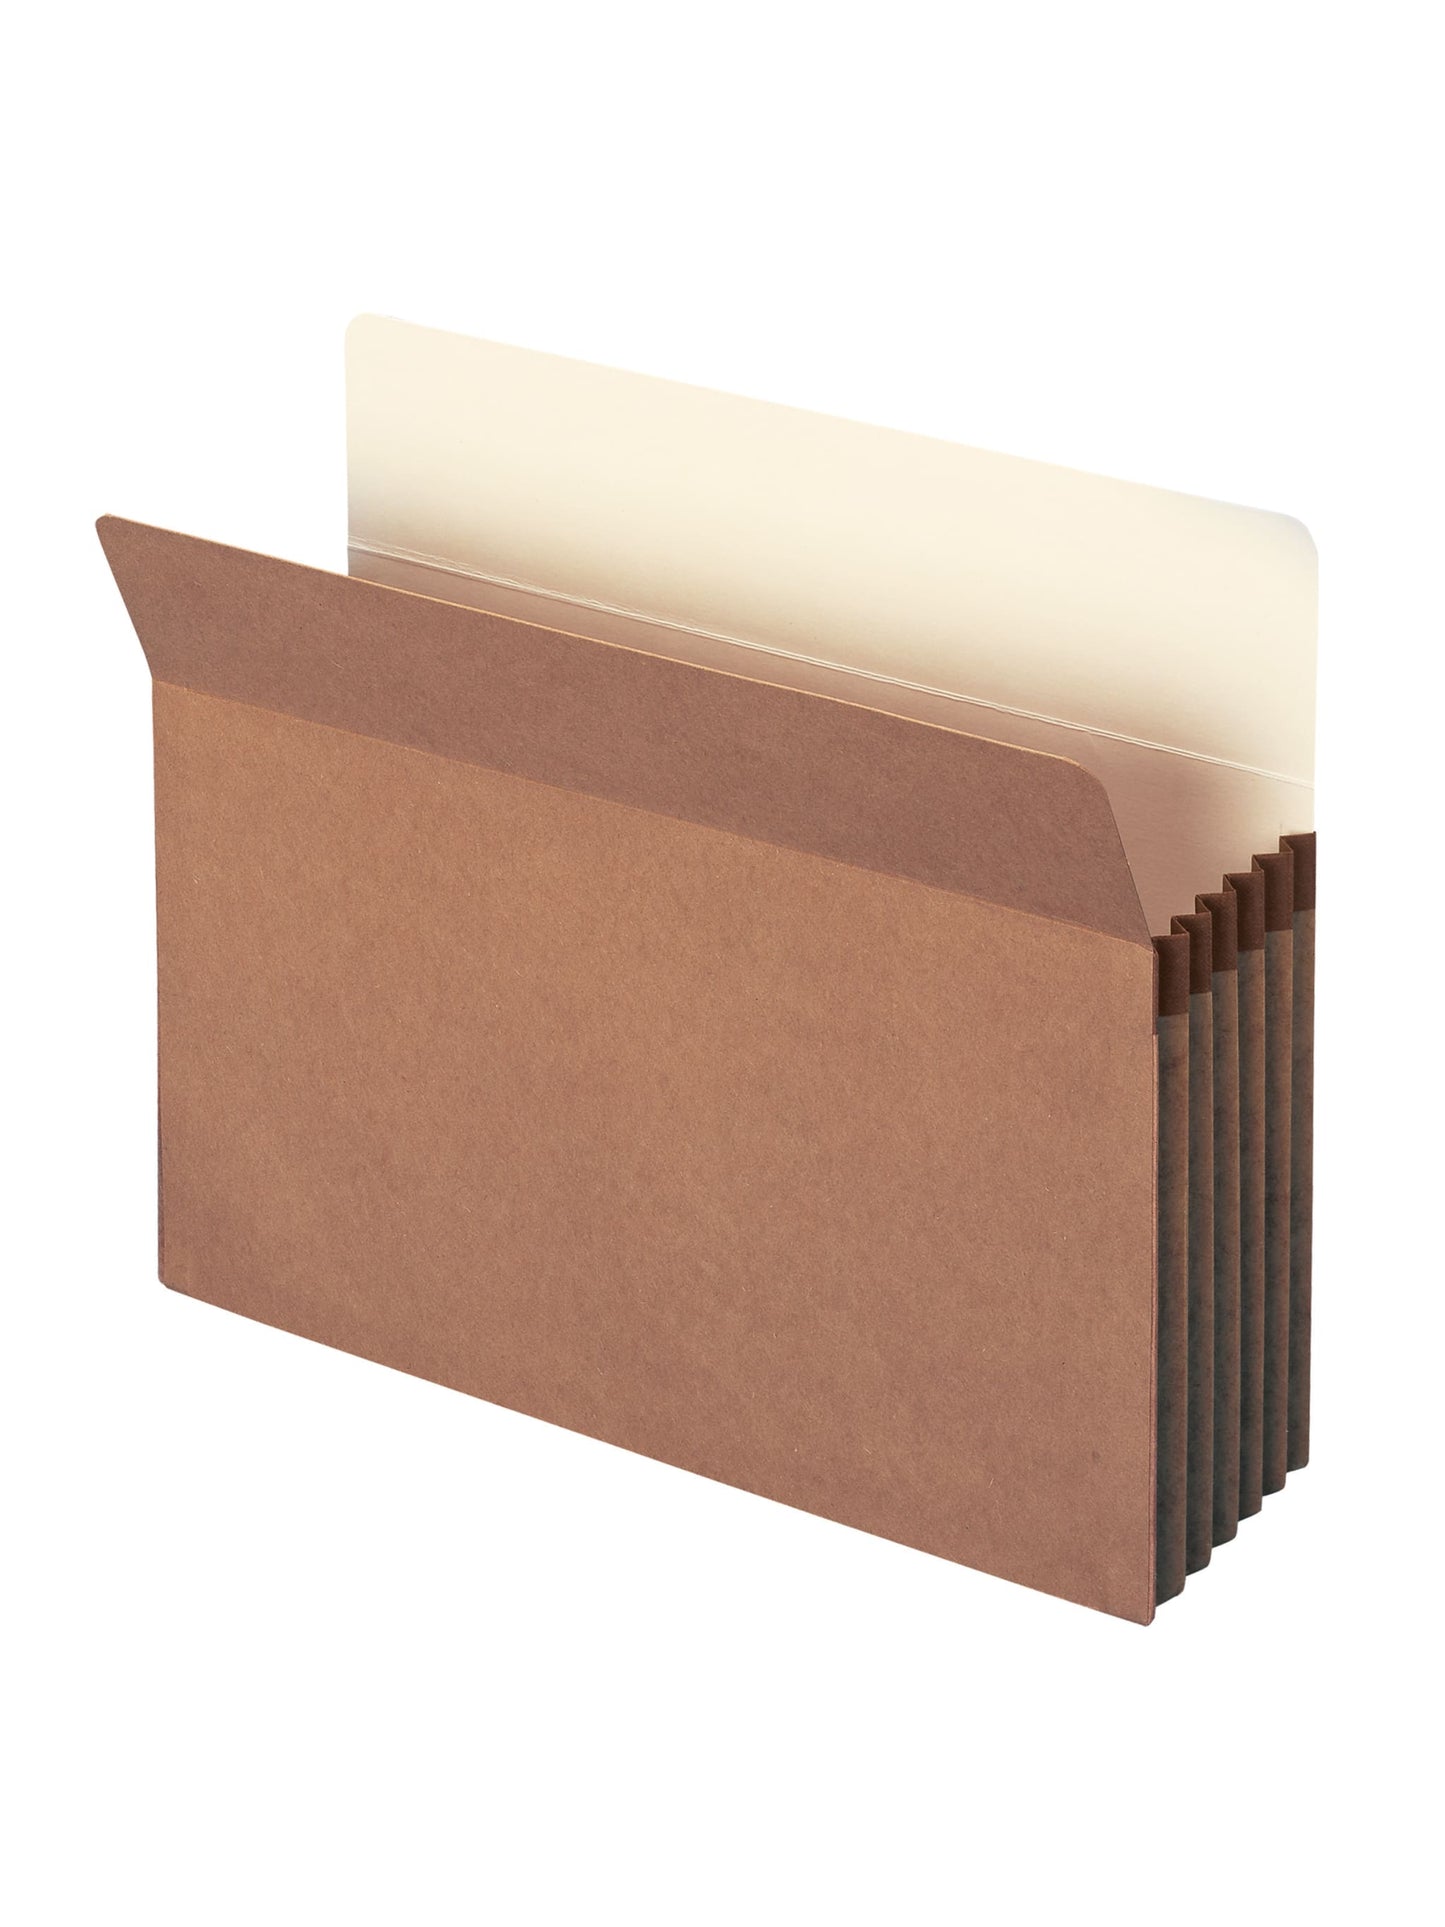 Redrope File Pockets, Guide Height, Straight-Cut Tab, 5-1/4 Inch Expansion, Redrope Color, Letter Size, Set of 0, 50086486738106